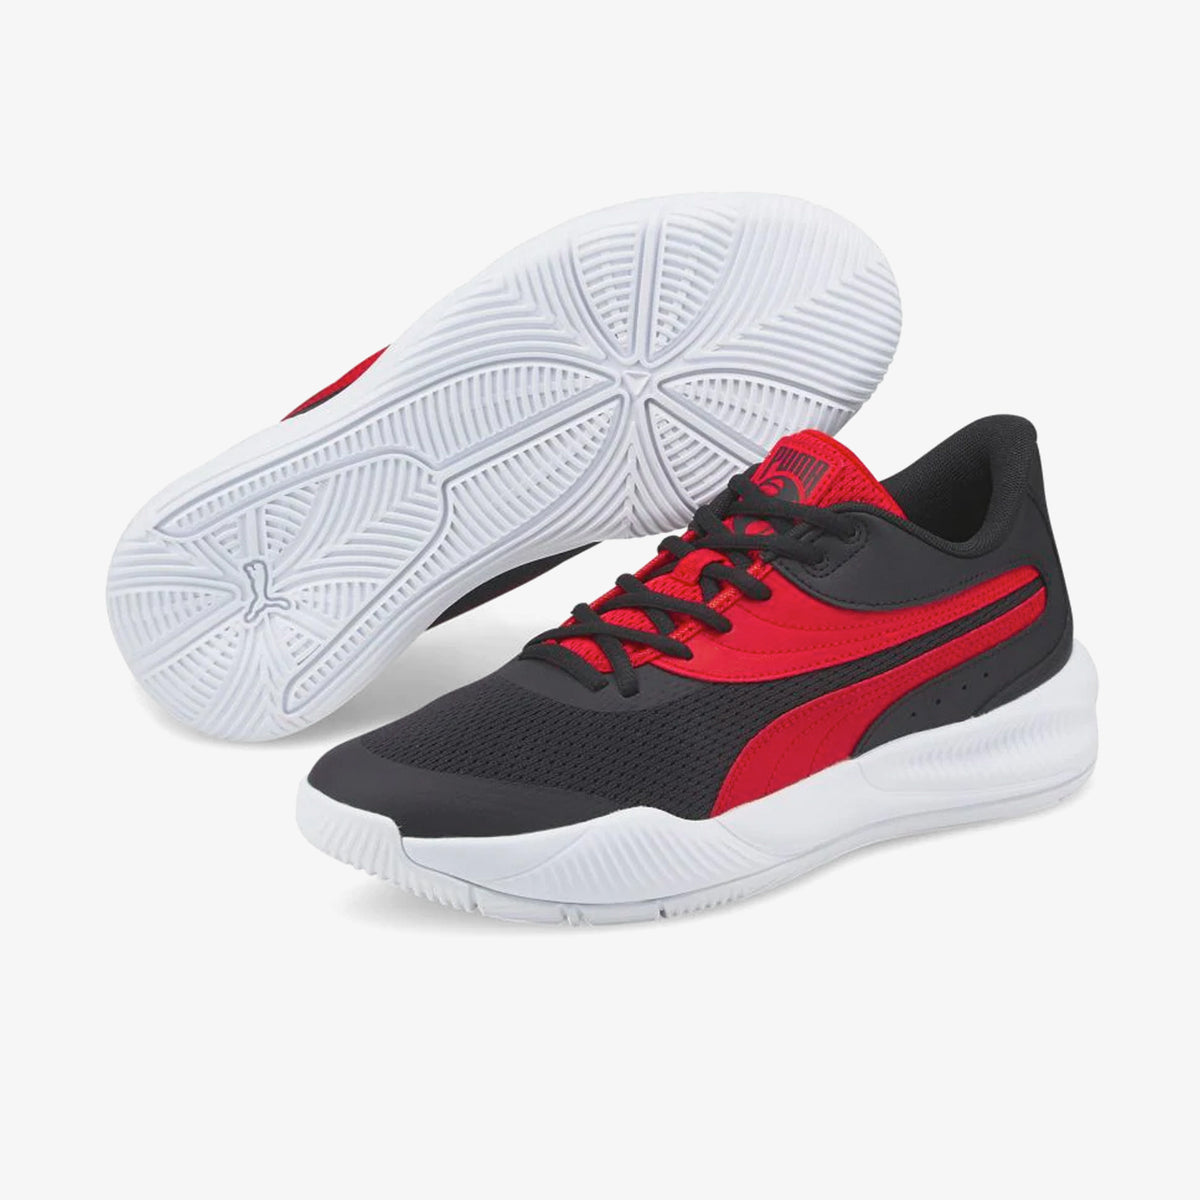 Triple Basketball Shoes - Black/Red